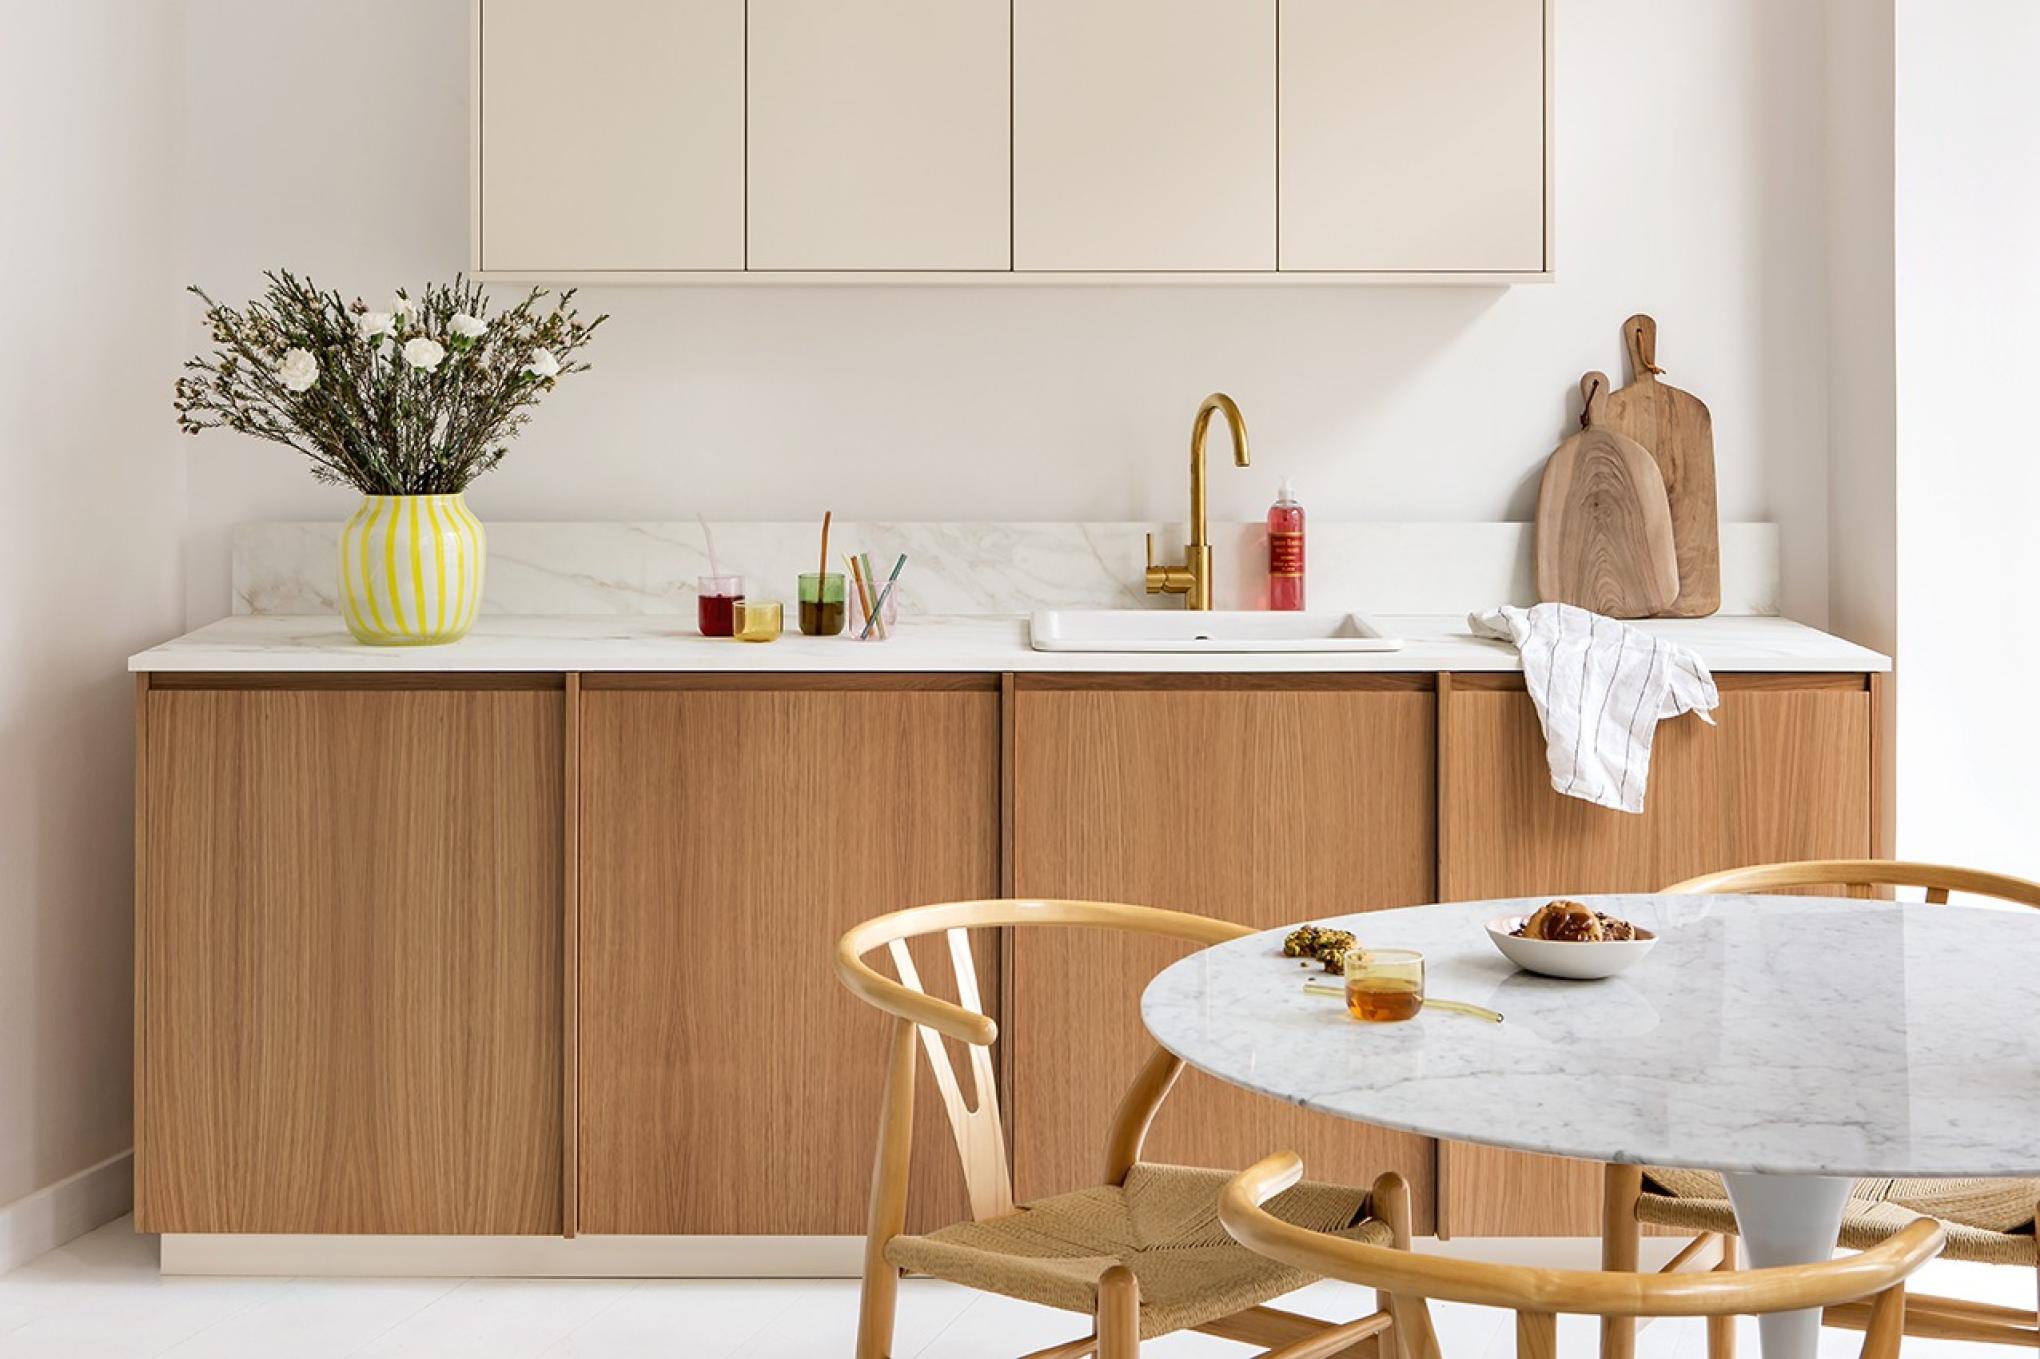 A two tone kitchen in Ivoire and Honey oak